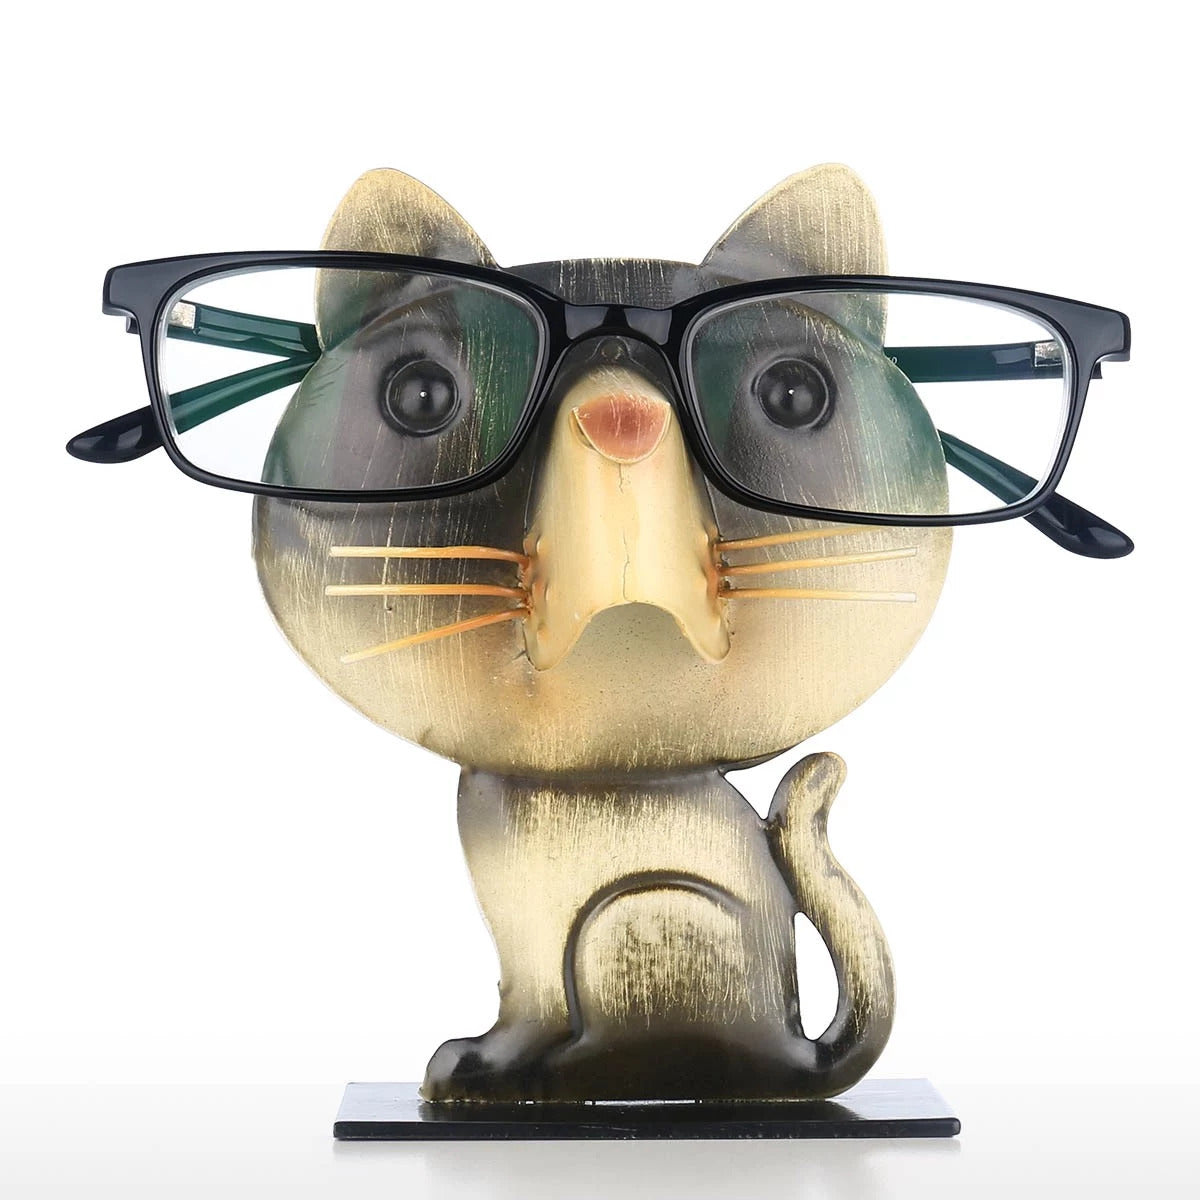 Eyeglass Rack with Cat Figurines Ornaments to Desk Organizer and Desktop Accessories in Business or Home Life